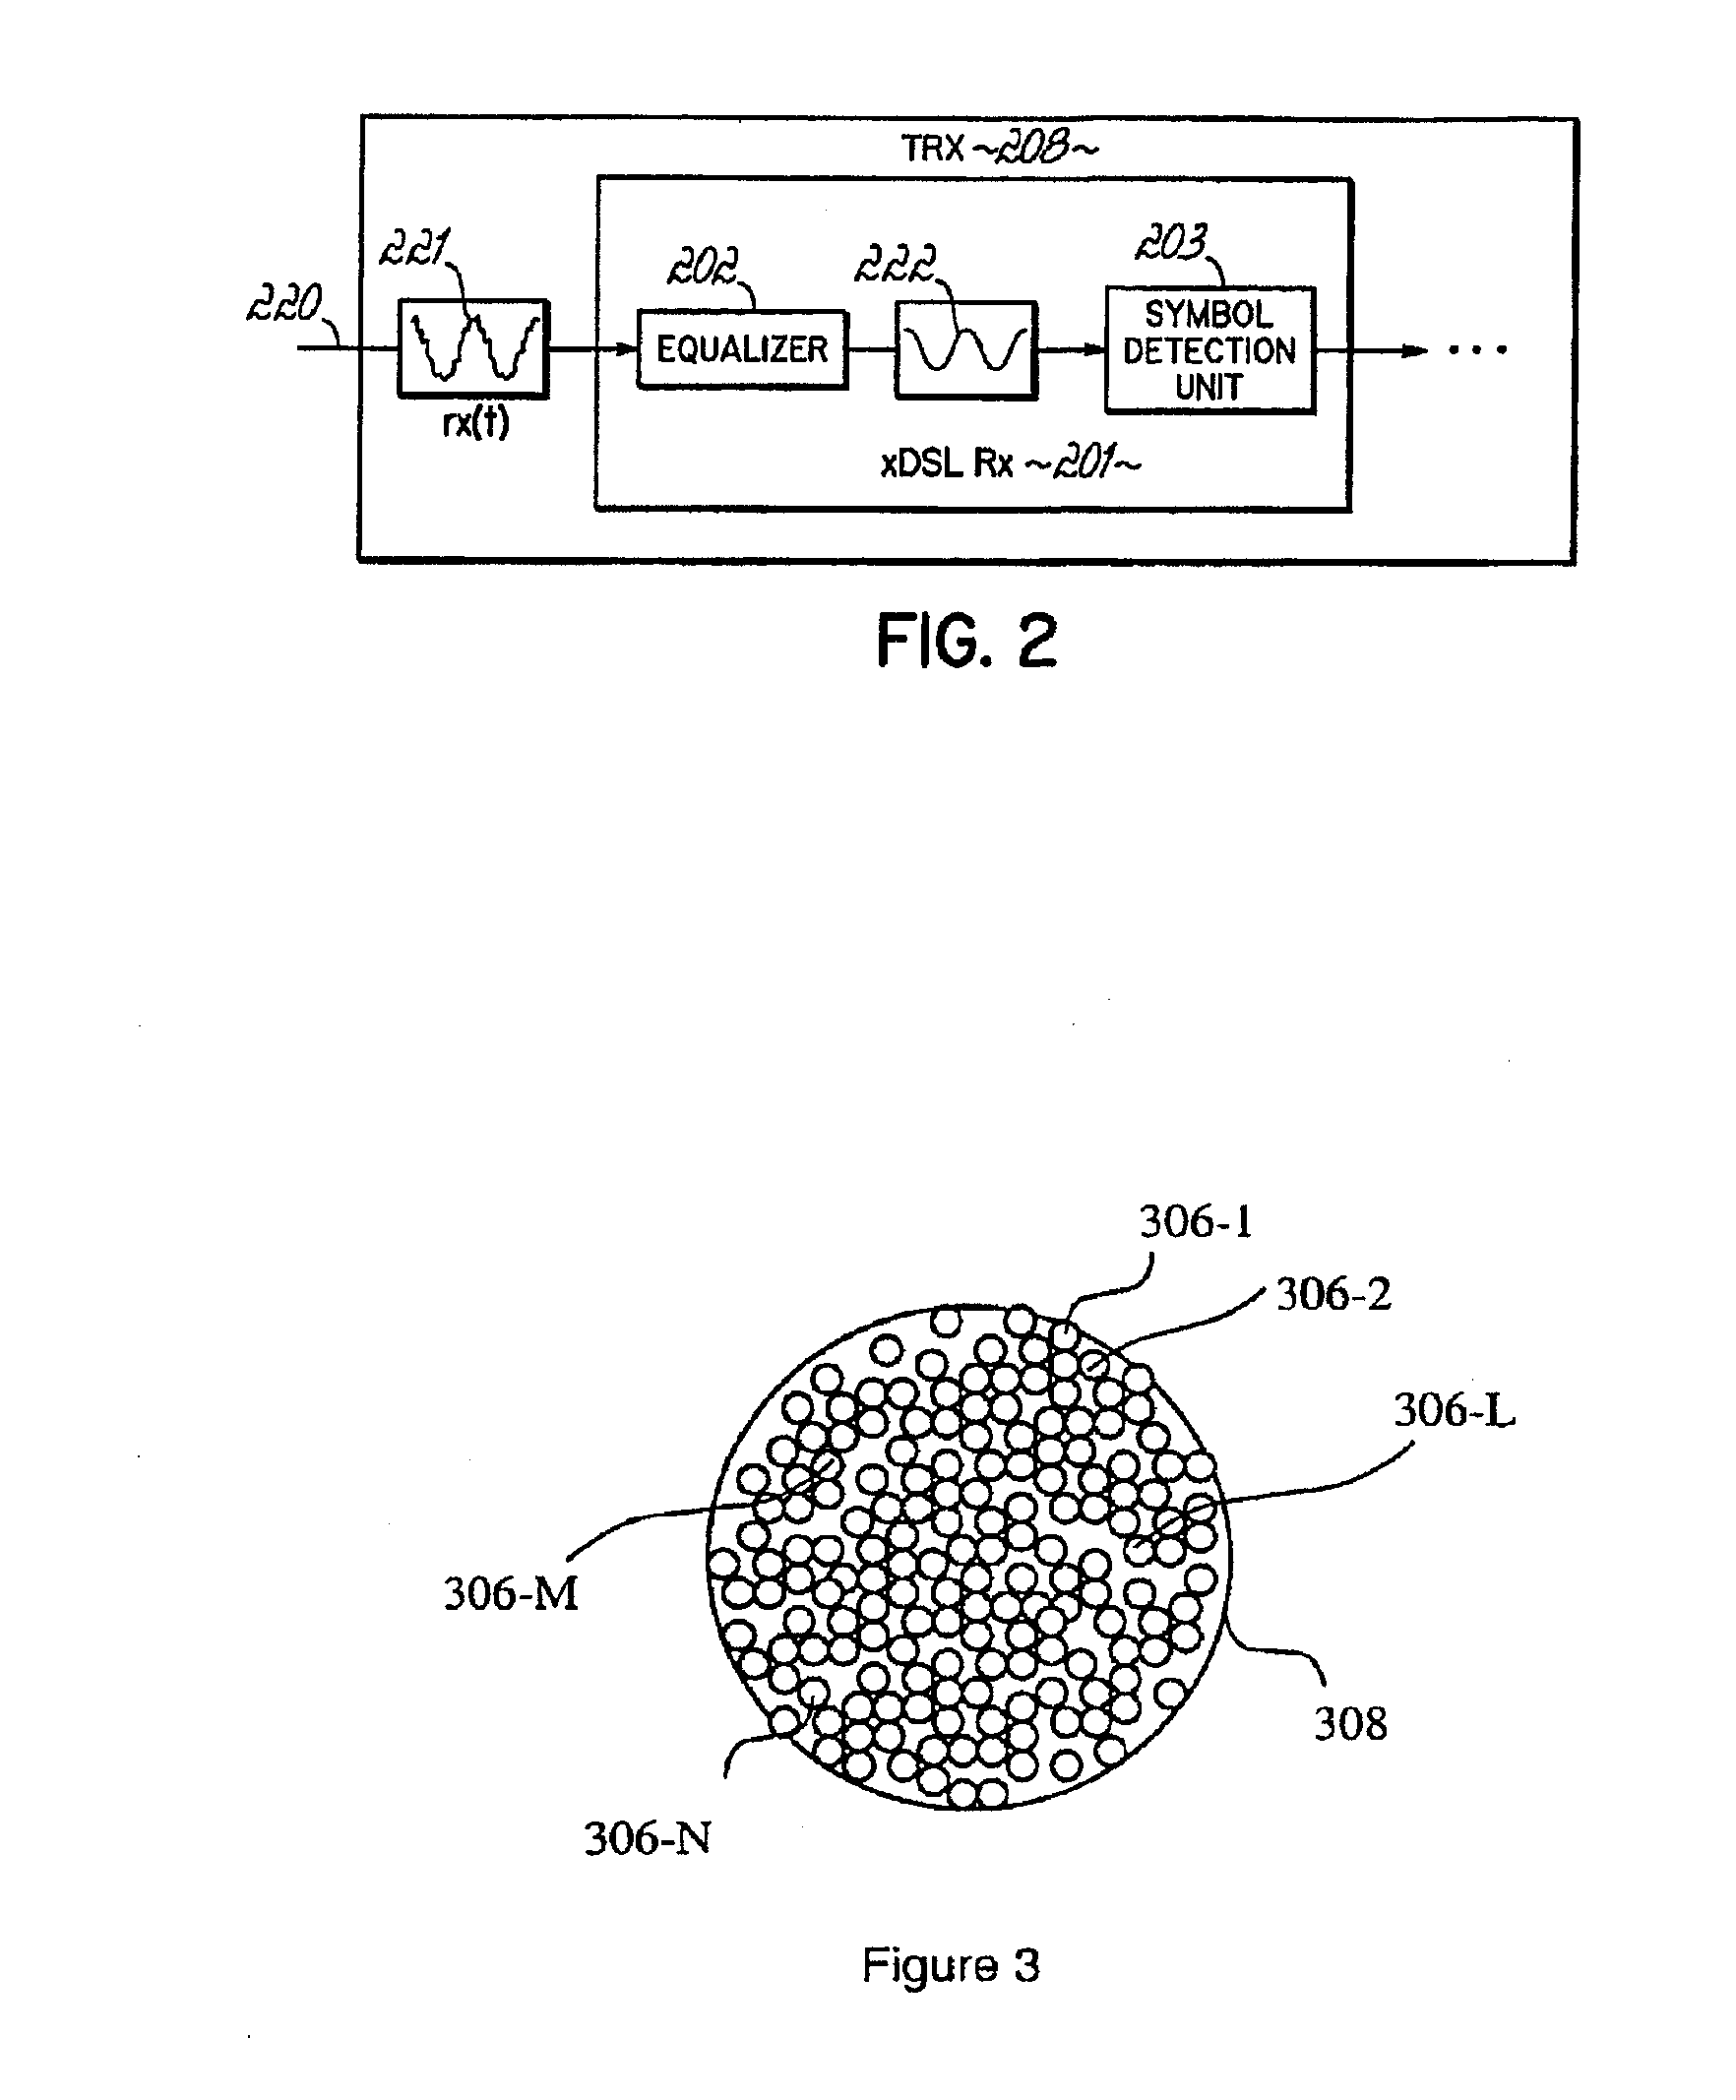 Mitigation of Interference and Crosstalk in Communications Systems